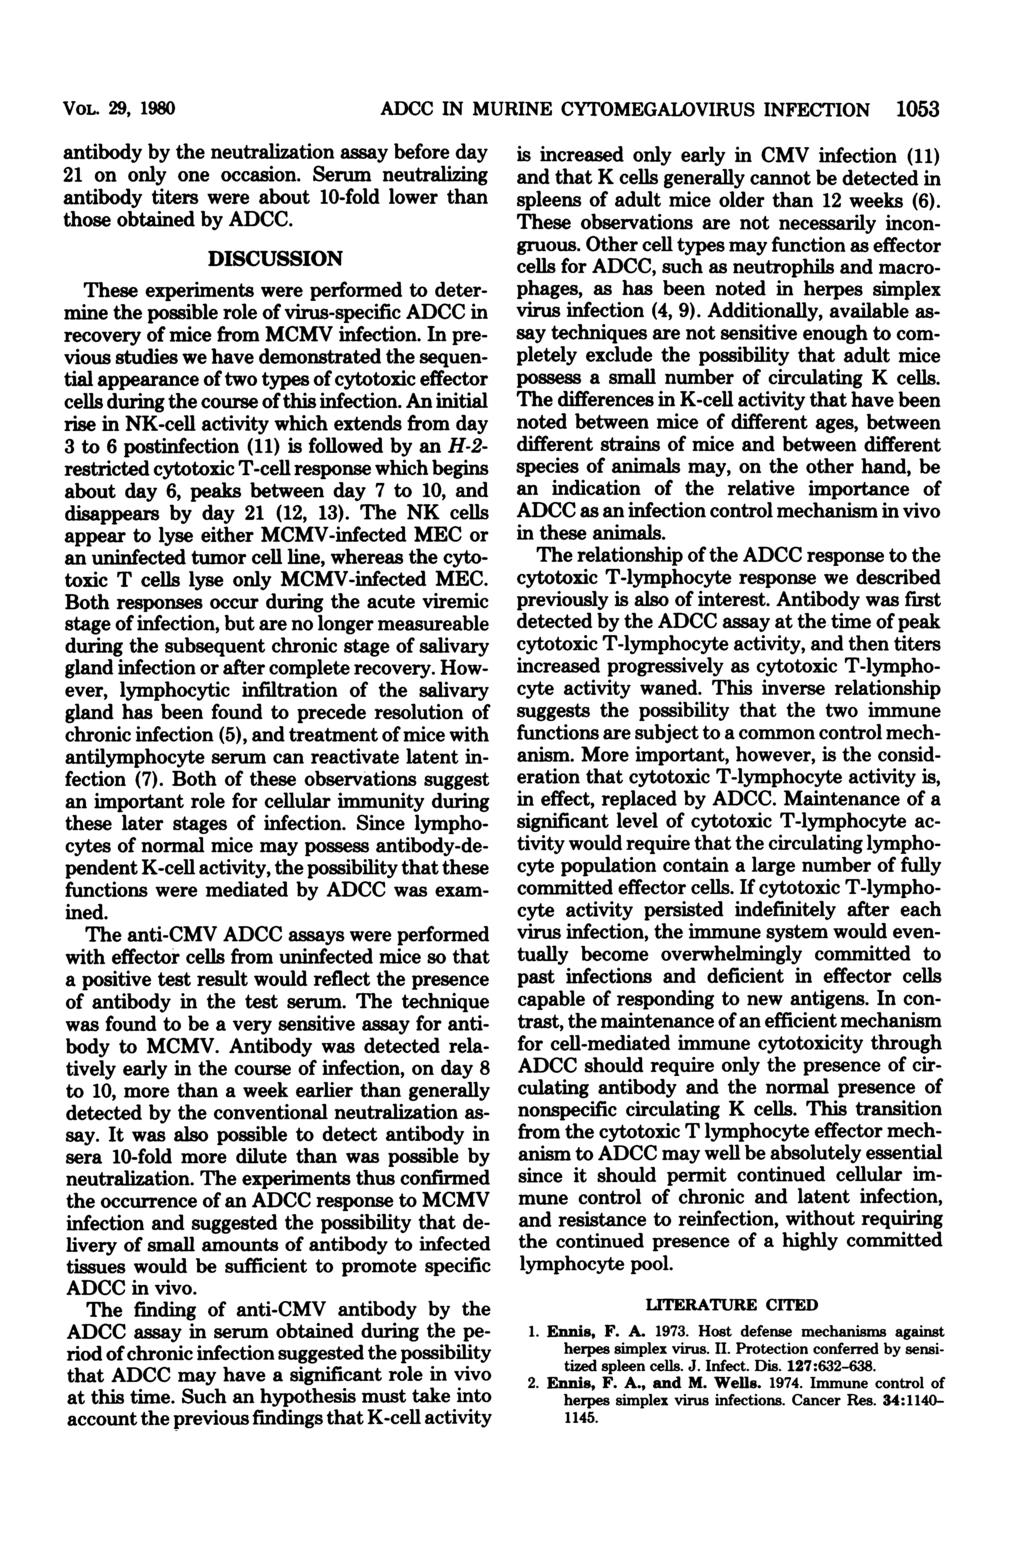 VOL. 29, 1980 antibody by the neutralization assay before day 21 on only one occasion. Serum neutralizing antibody titers were about 10-fold lower than those obtained by ADCC.